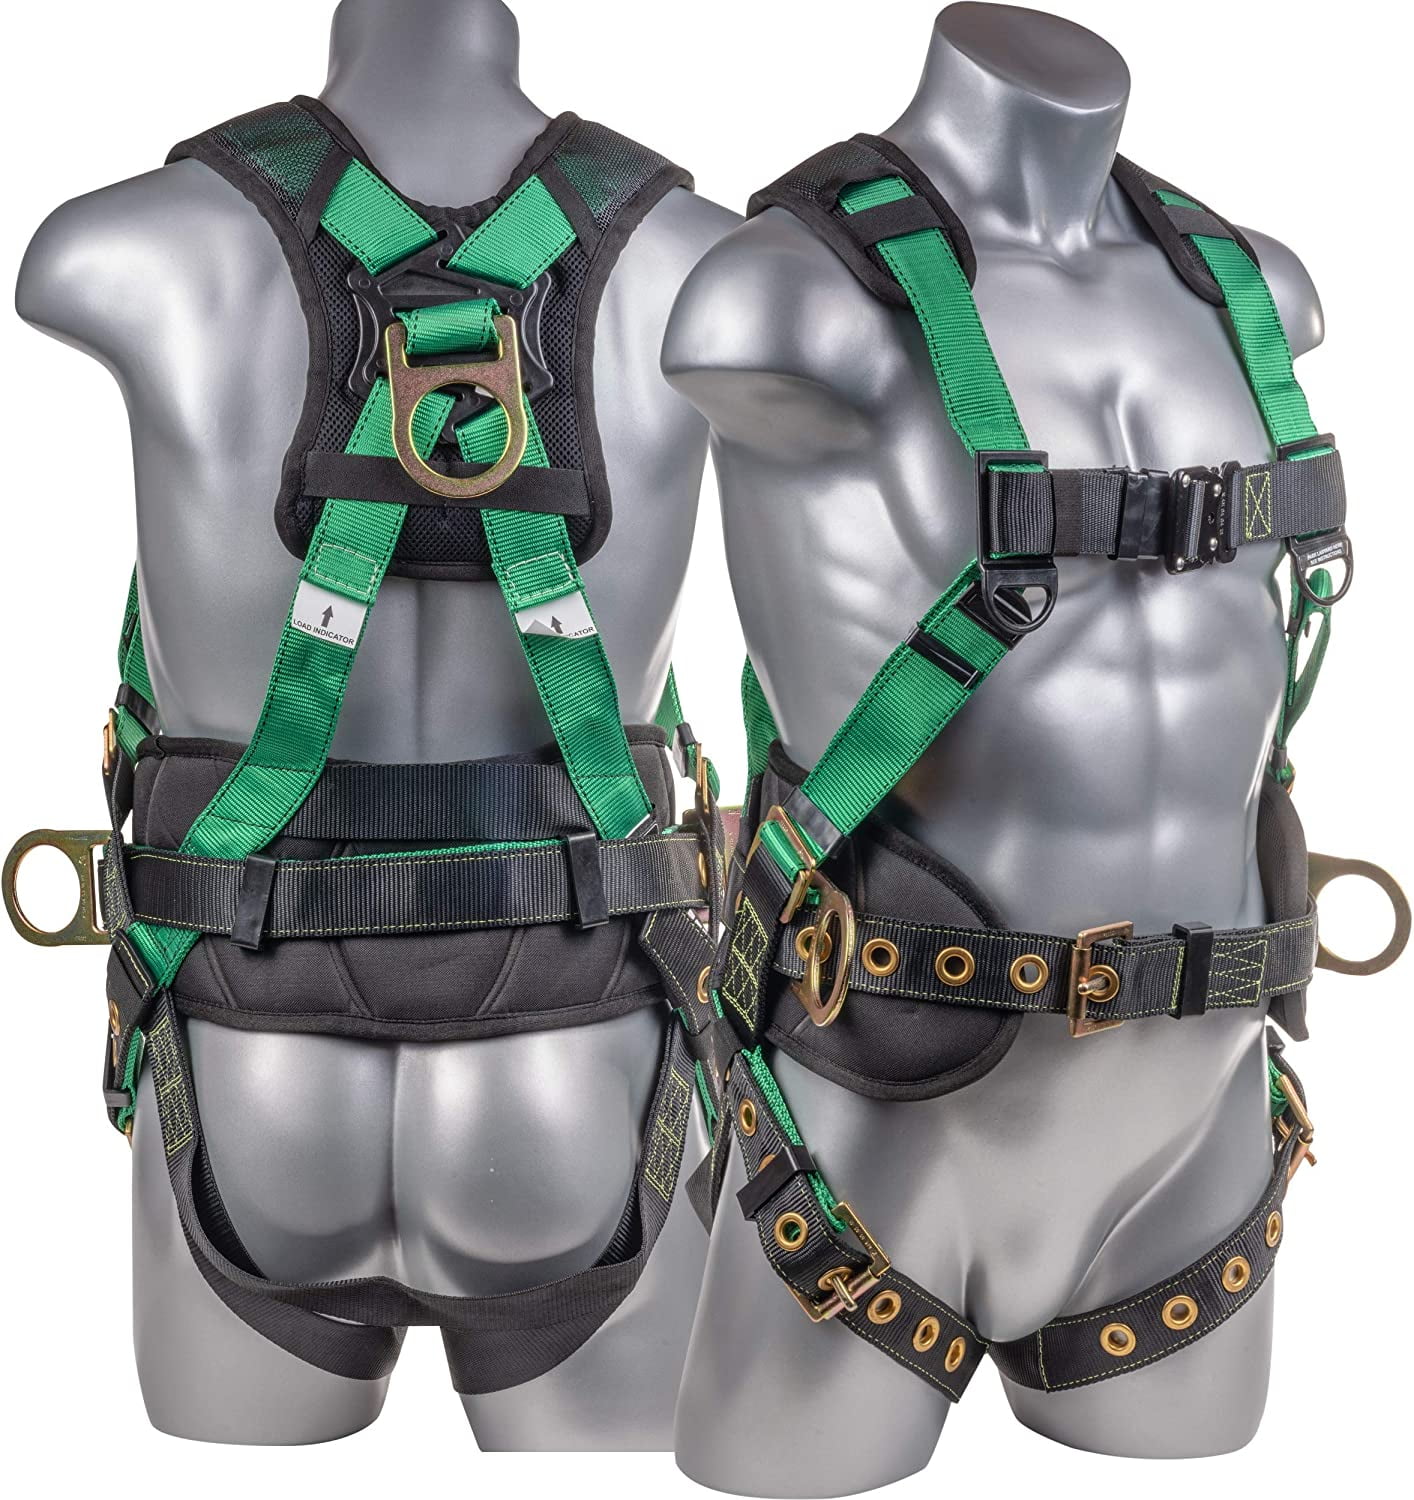 M-XLarge Waist Tounge Buckle and Leg Tounge Buckles Guardian Fall Protection 193061 Construction Premium Edge Harness with Pass-Thru Chest Buckle 